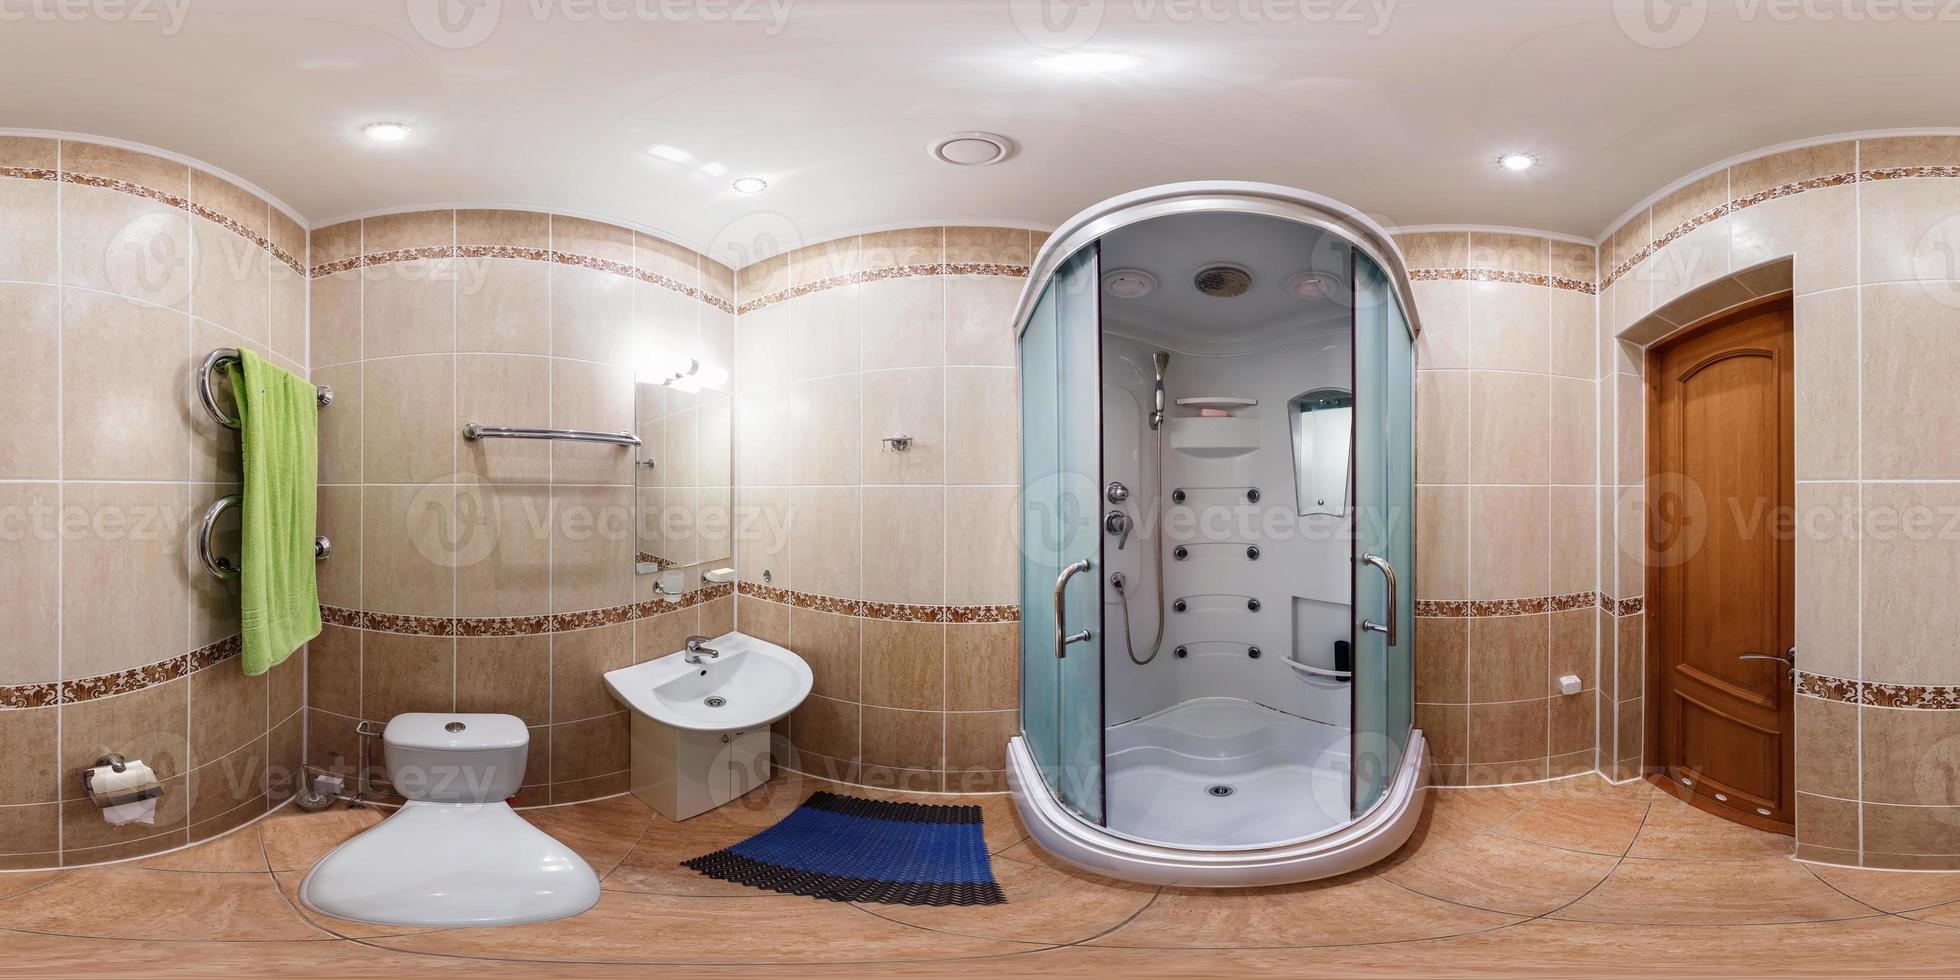 seamless 360 panorama in interior of bathroom of cheap hotel,  flat or apartments with toilet, washbasin and shower in equirectangular projection with zenith and nadir. VR AR content photo